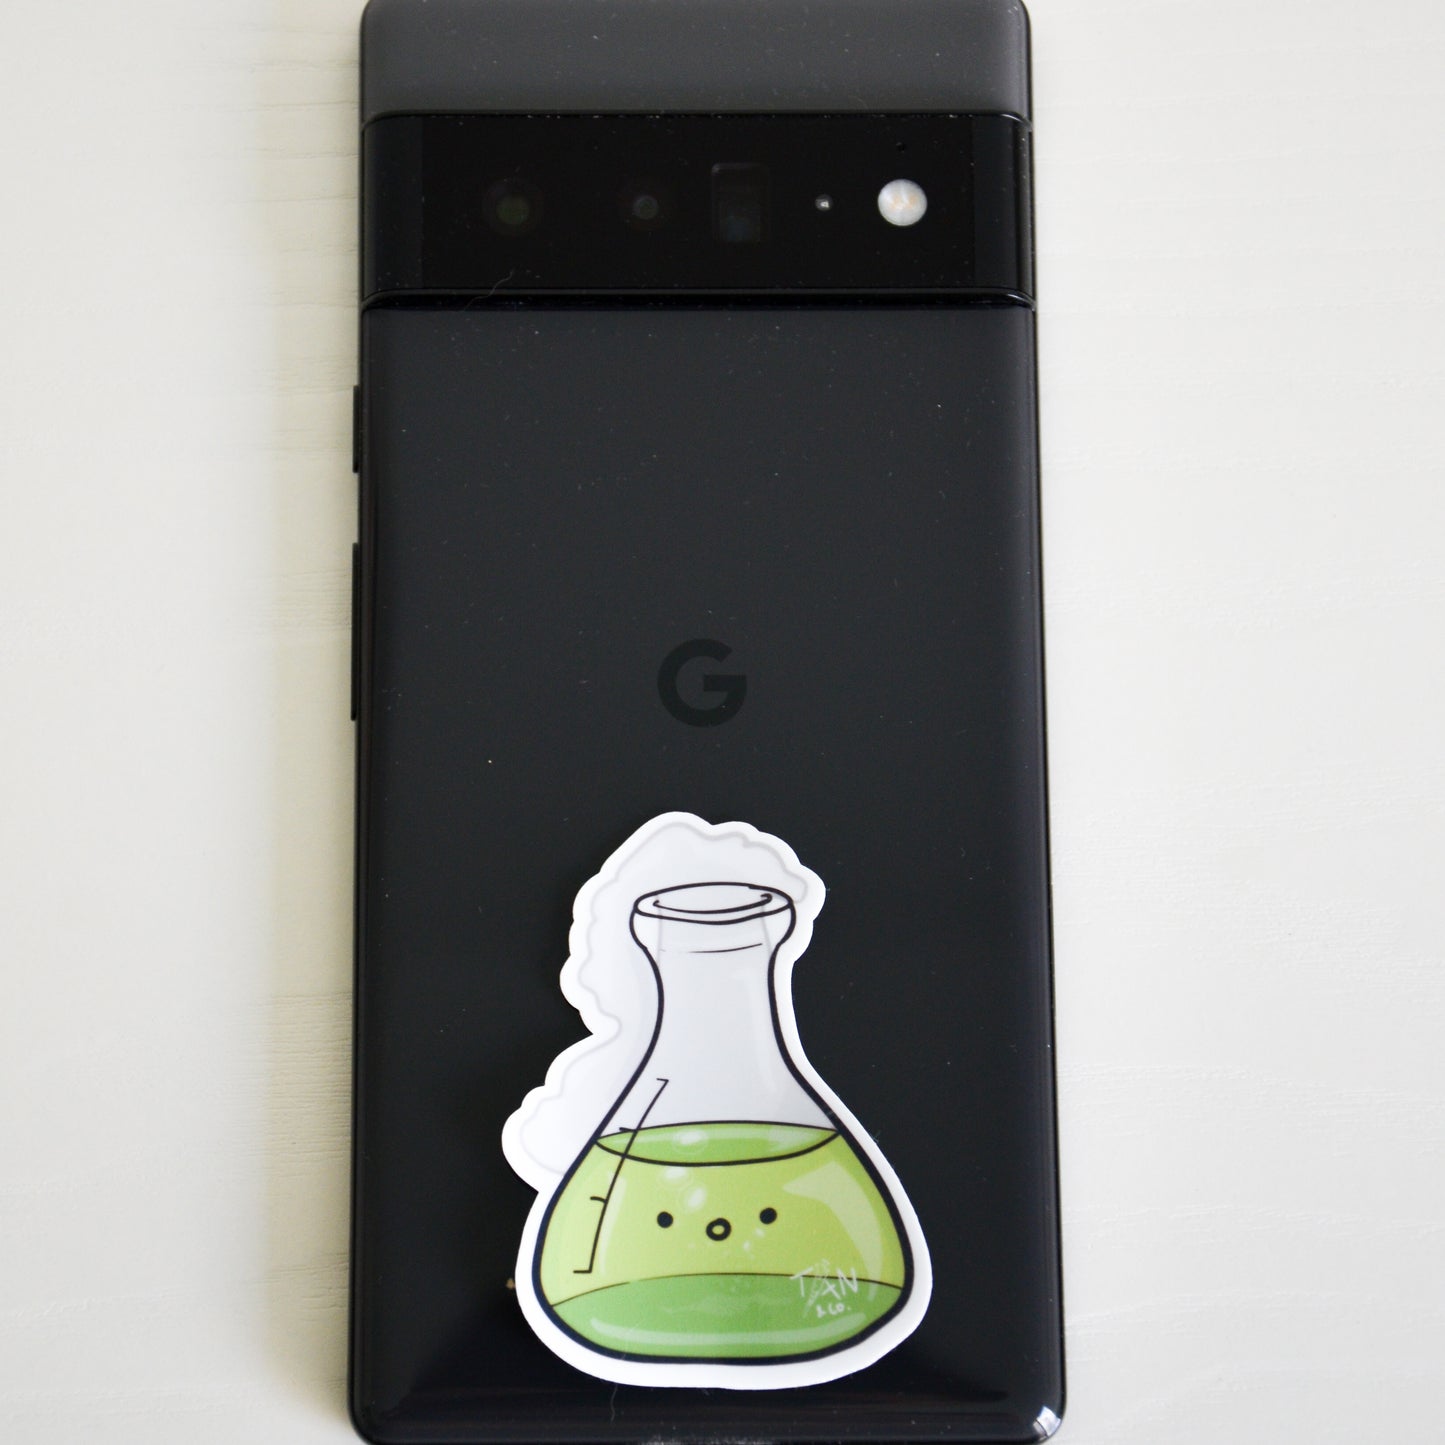 Green conical flask sticker on phone